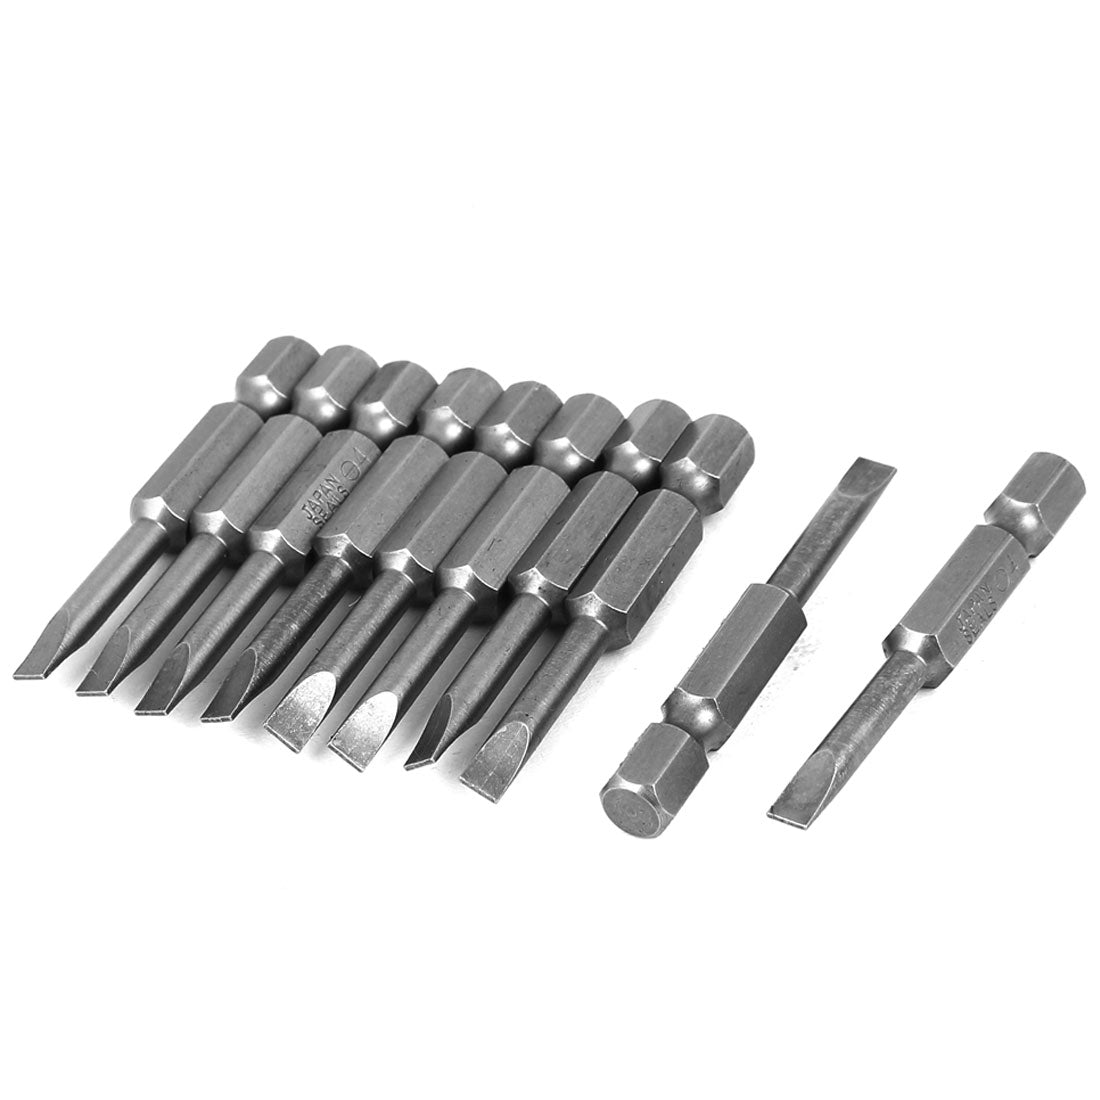 Uxcell Uxcell 2.5mm Tip Magnetic Slotted Flat Head Screw Driver Bits 10 Pcs